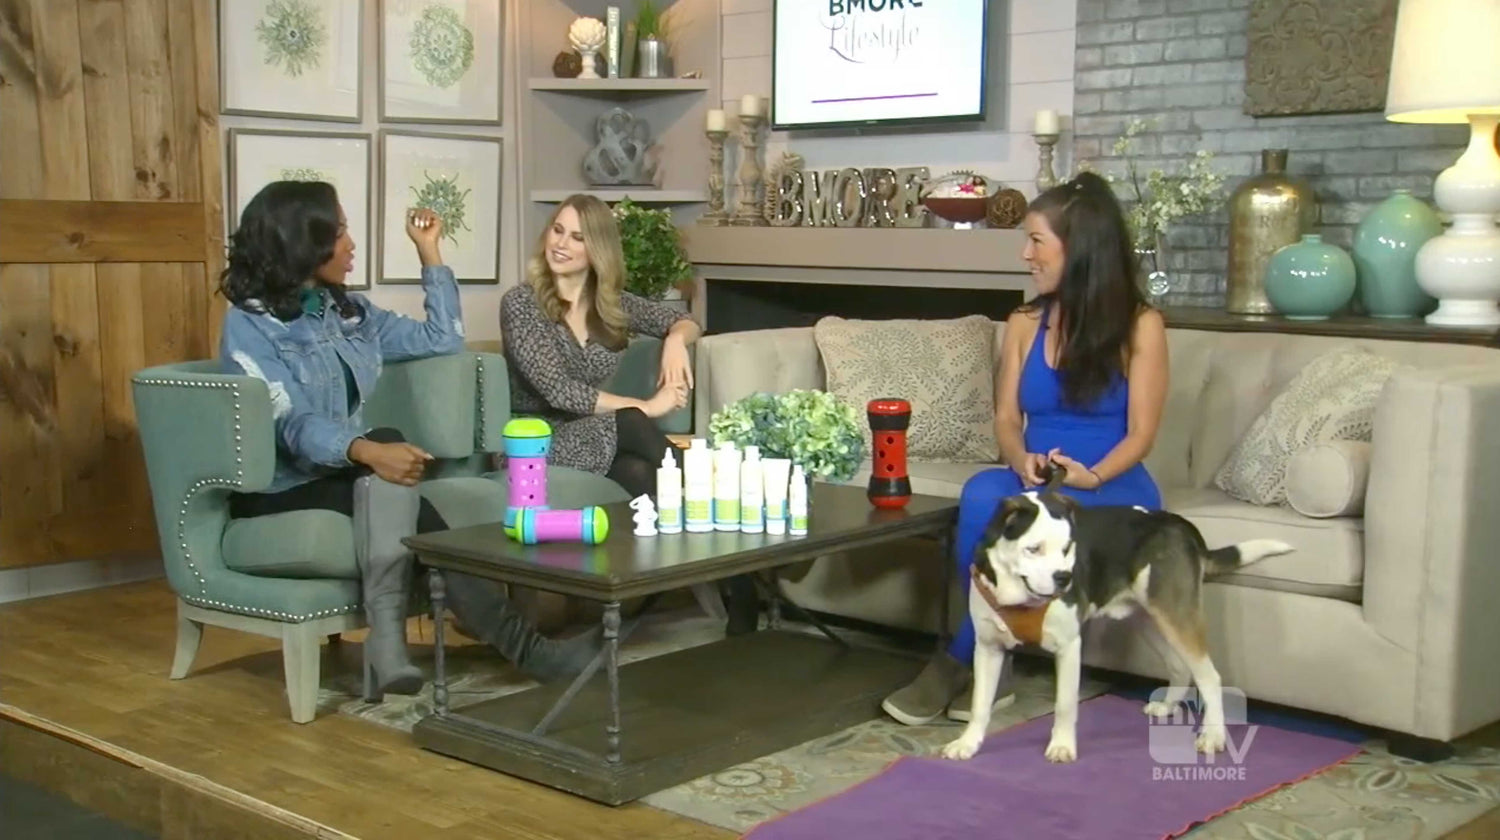 Oxyfresh Pet Products Featured on BMORE Lifestyle Show